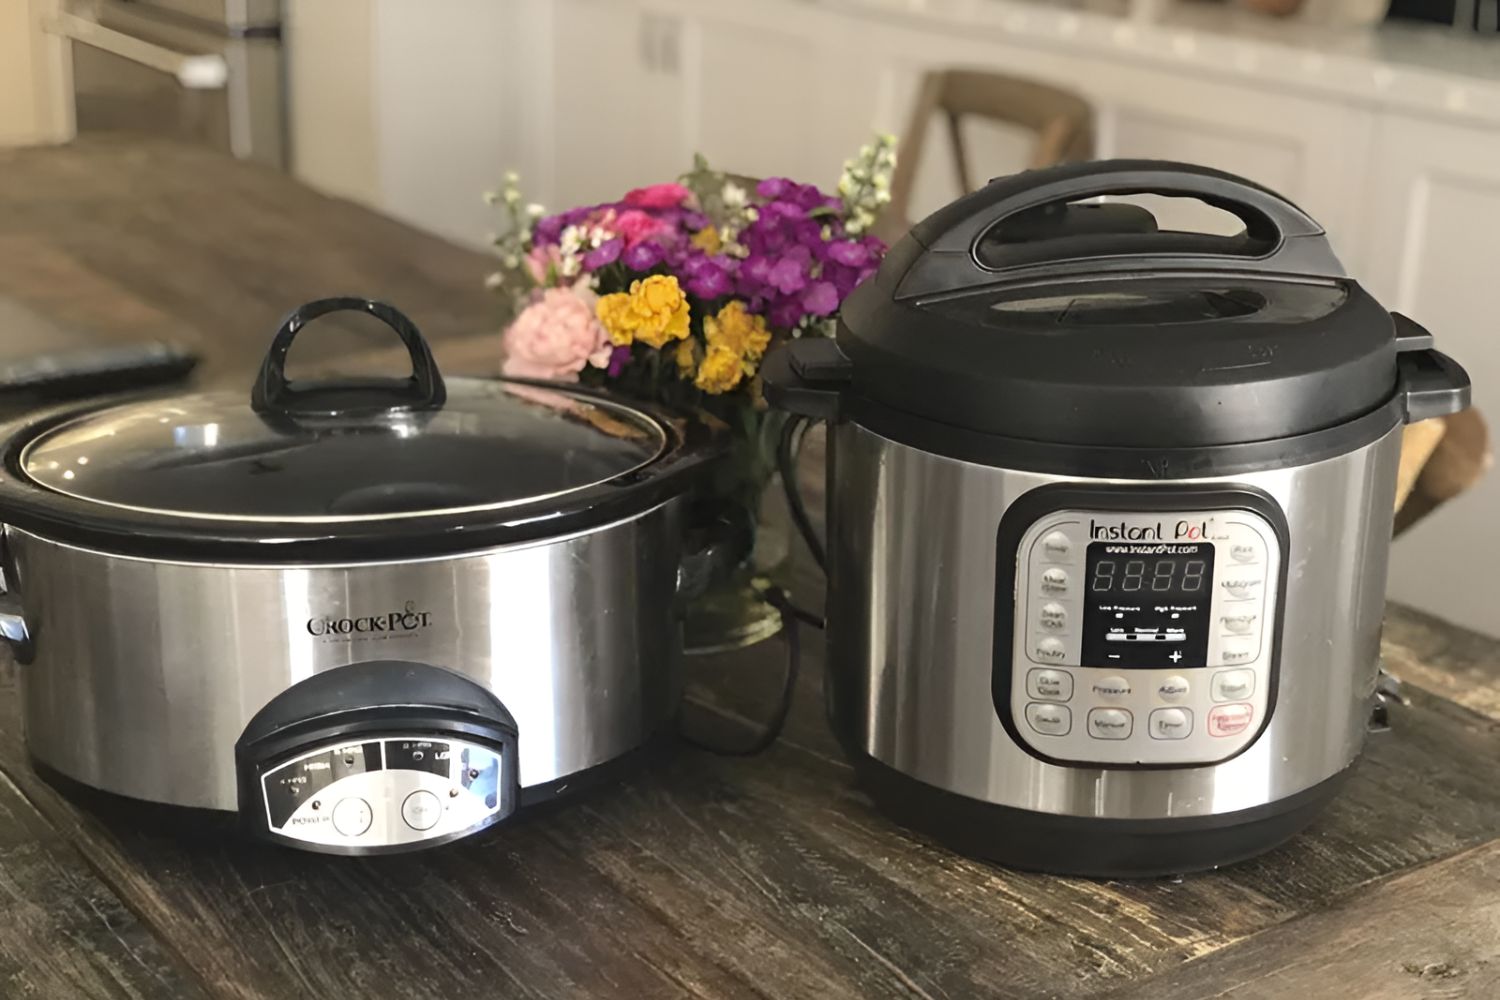 What Is The Difference Between An Instant Pot And An Electric Pressure Cooker